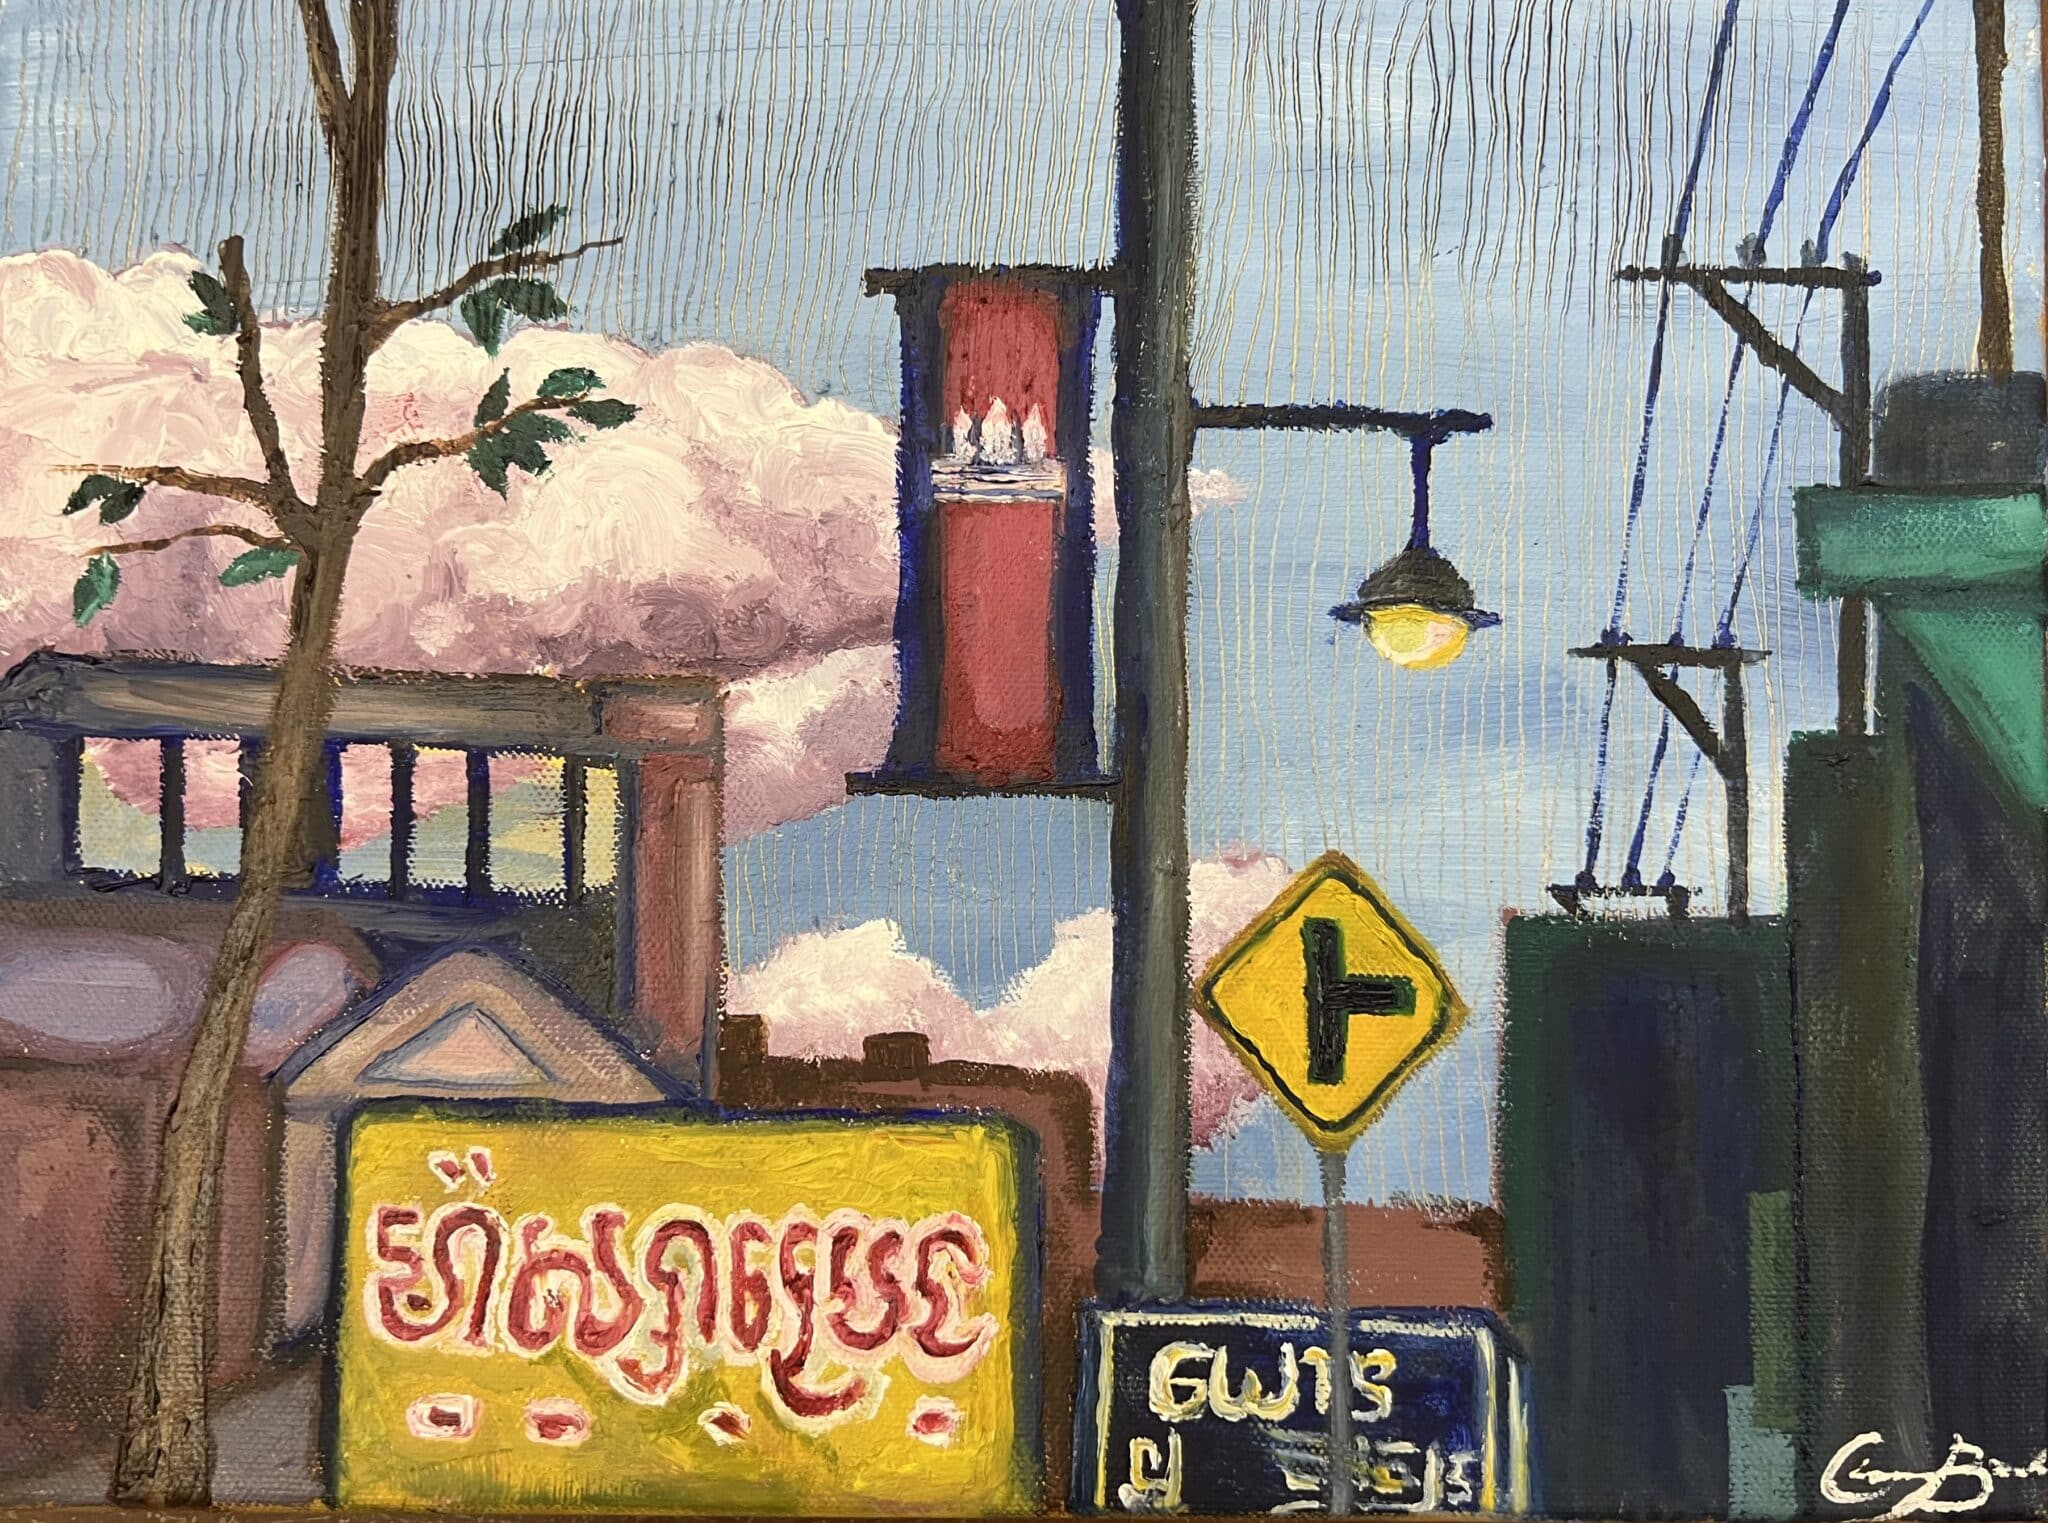 SCA senior Charlotte Brownlee’s piece “Cambodian Dream” received the fourth place honorable mention award in the acrylic/oil painting category at the “Festival of Color” Youth Art Show.